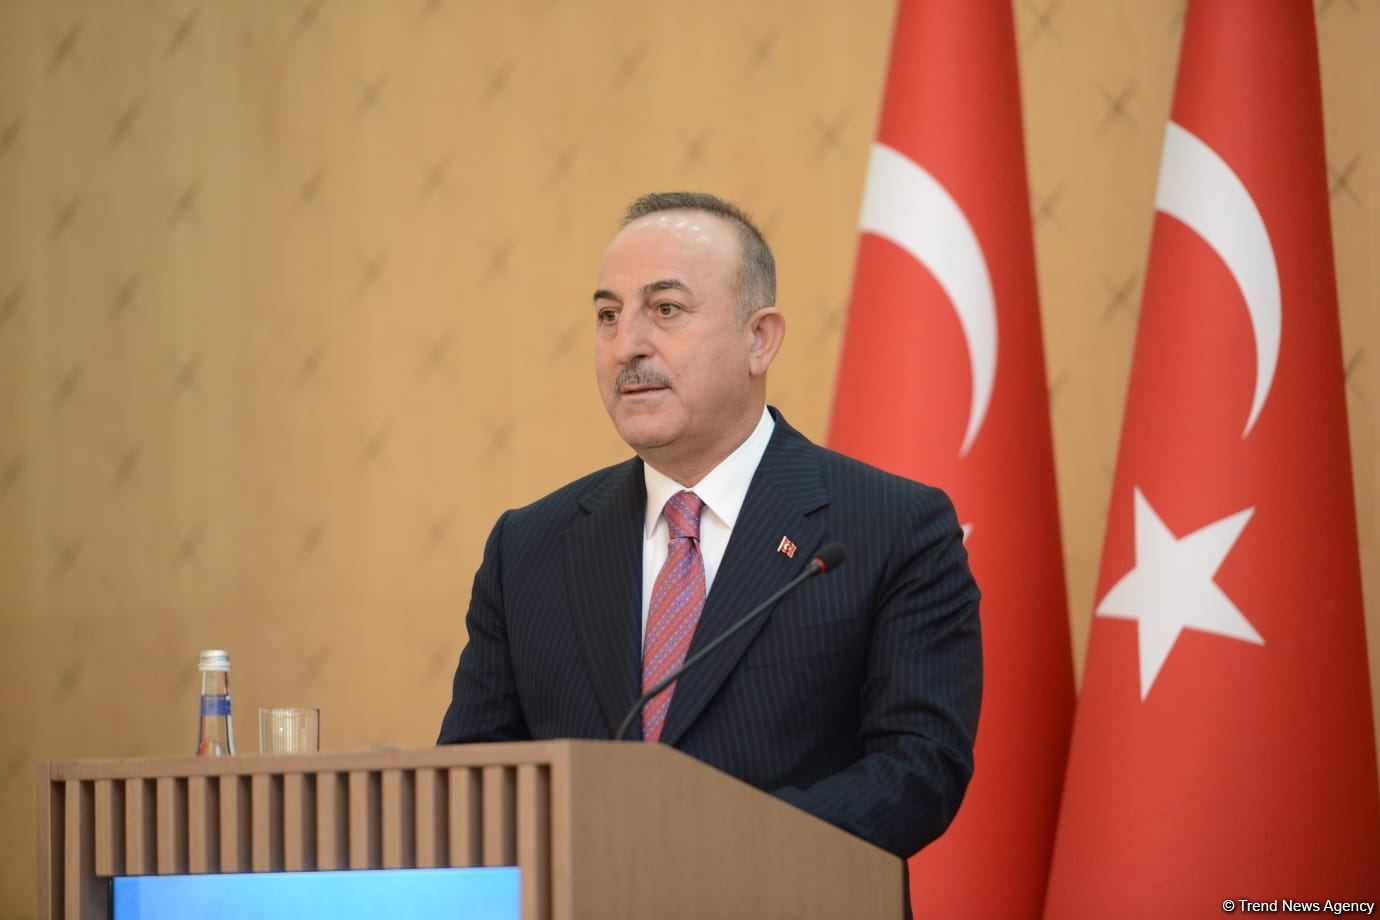 New opportunities open up for Turkic world after Azerbaijan's victory in Karabakh - Turkish FM